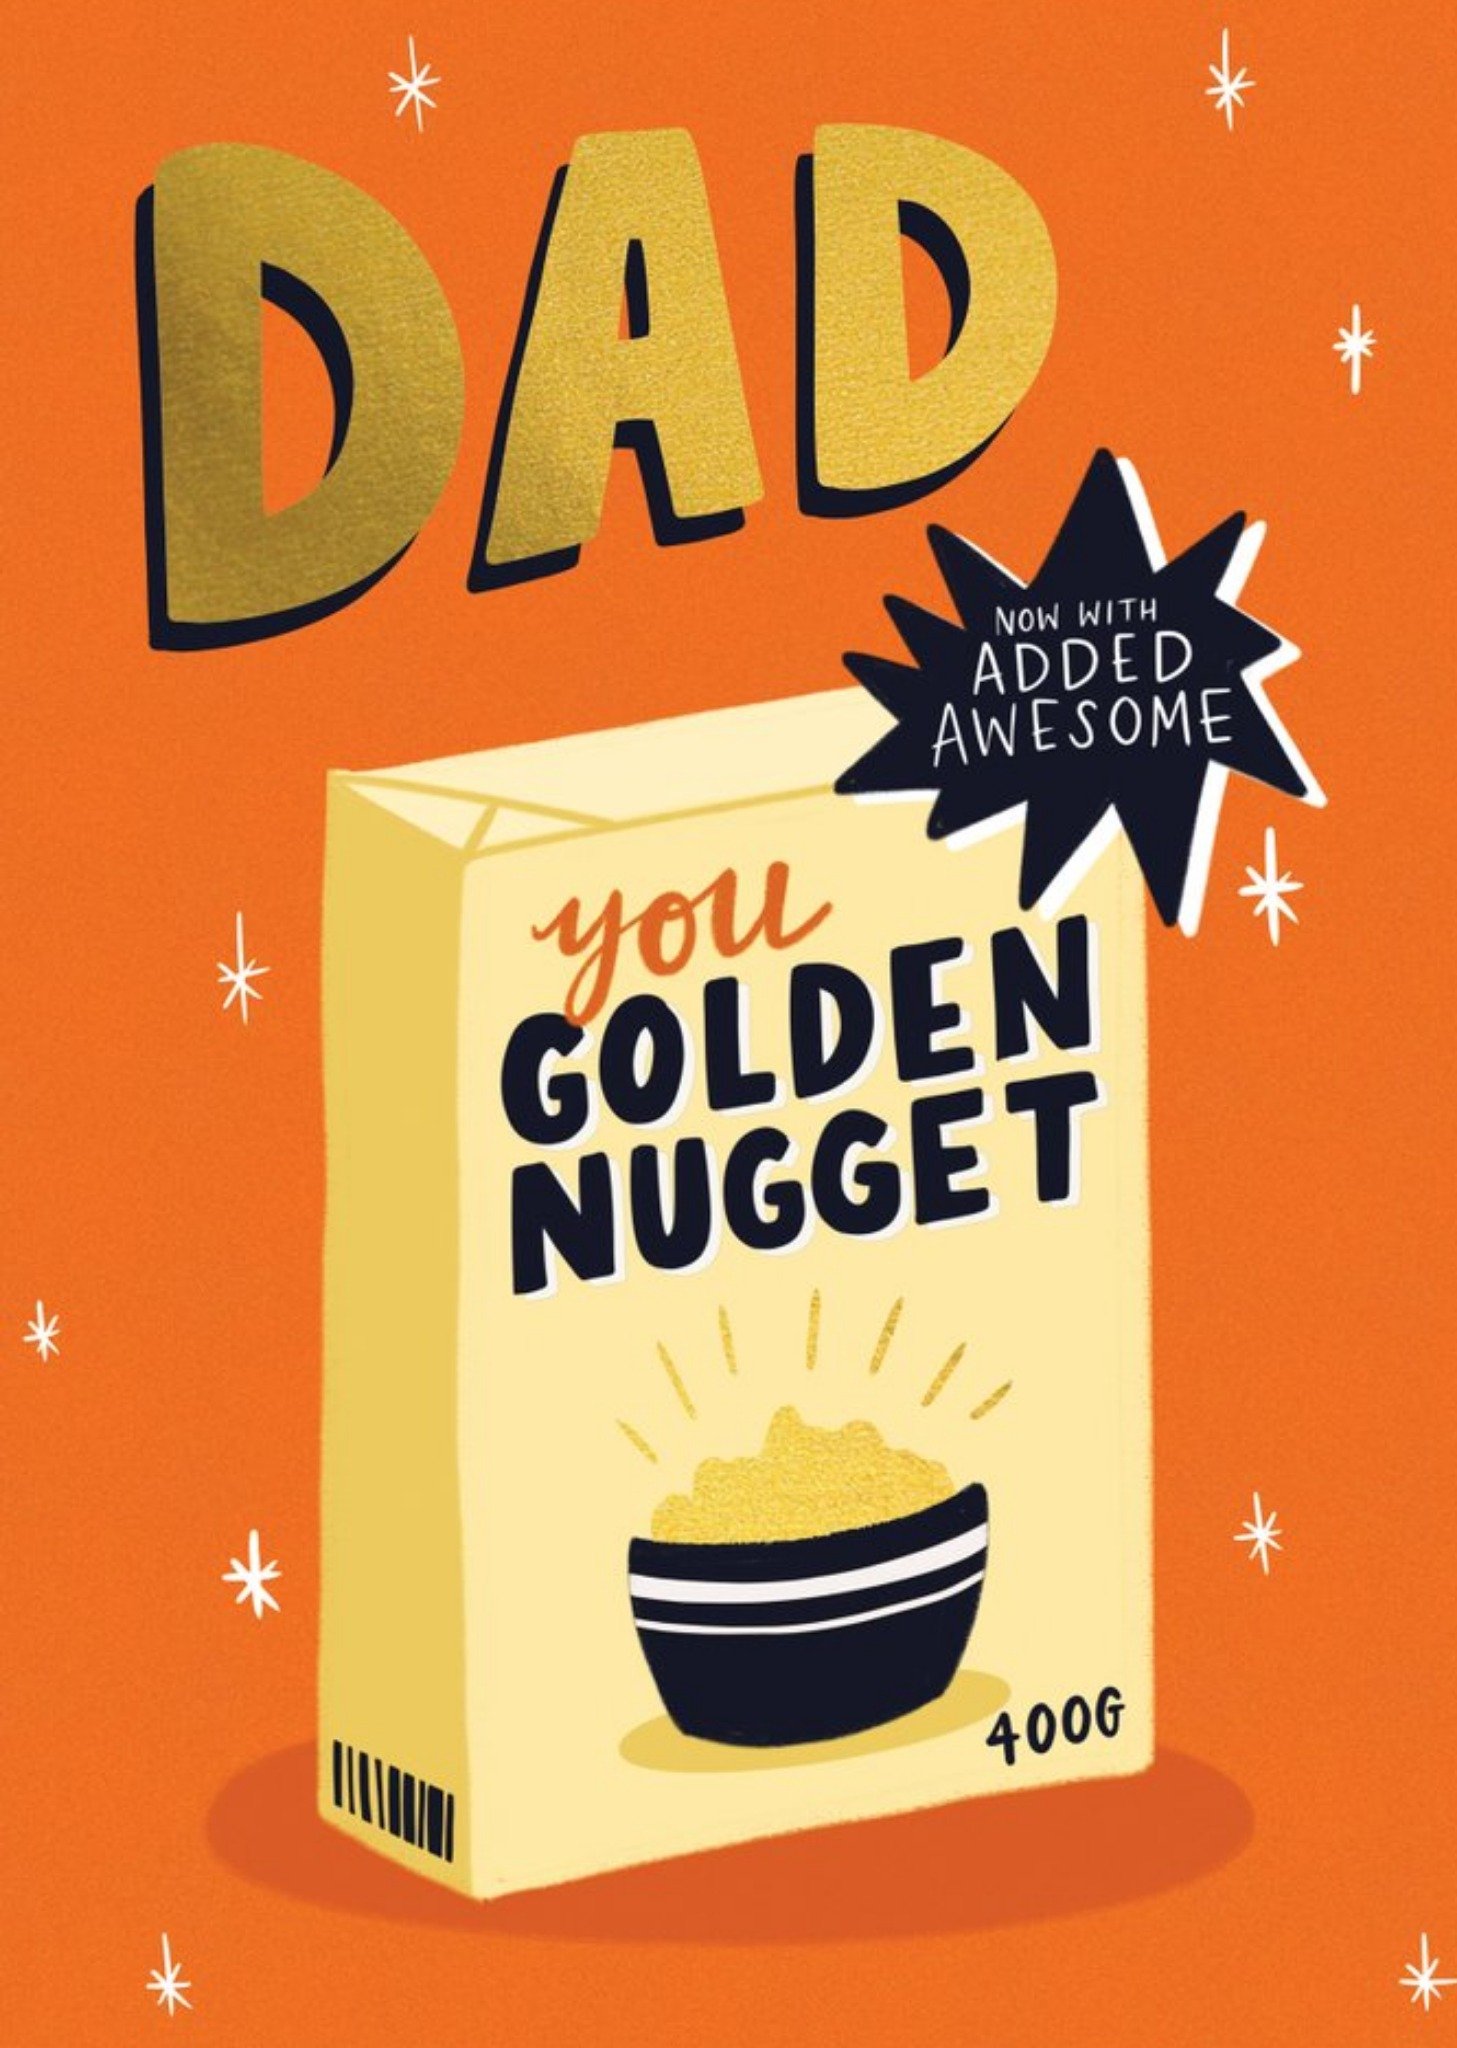 Moonpig Cereal Box You Golden Nugget Father's Day Card, Large